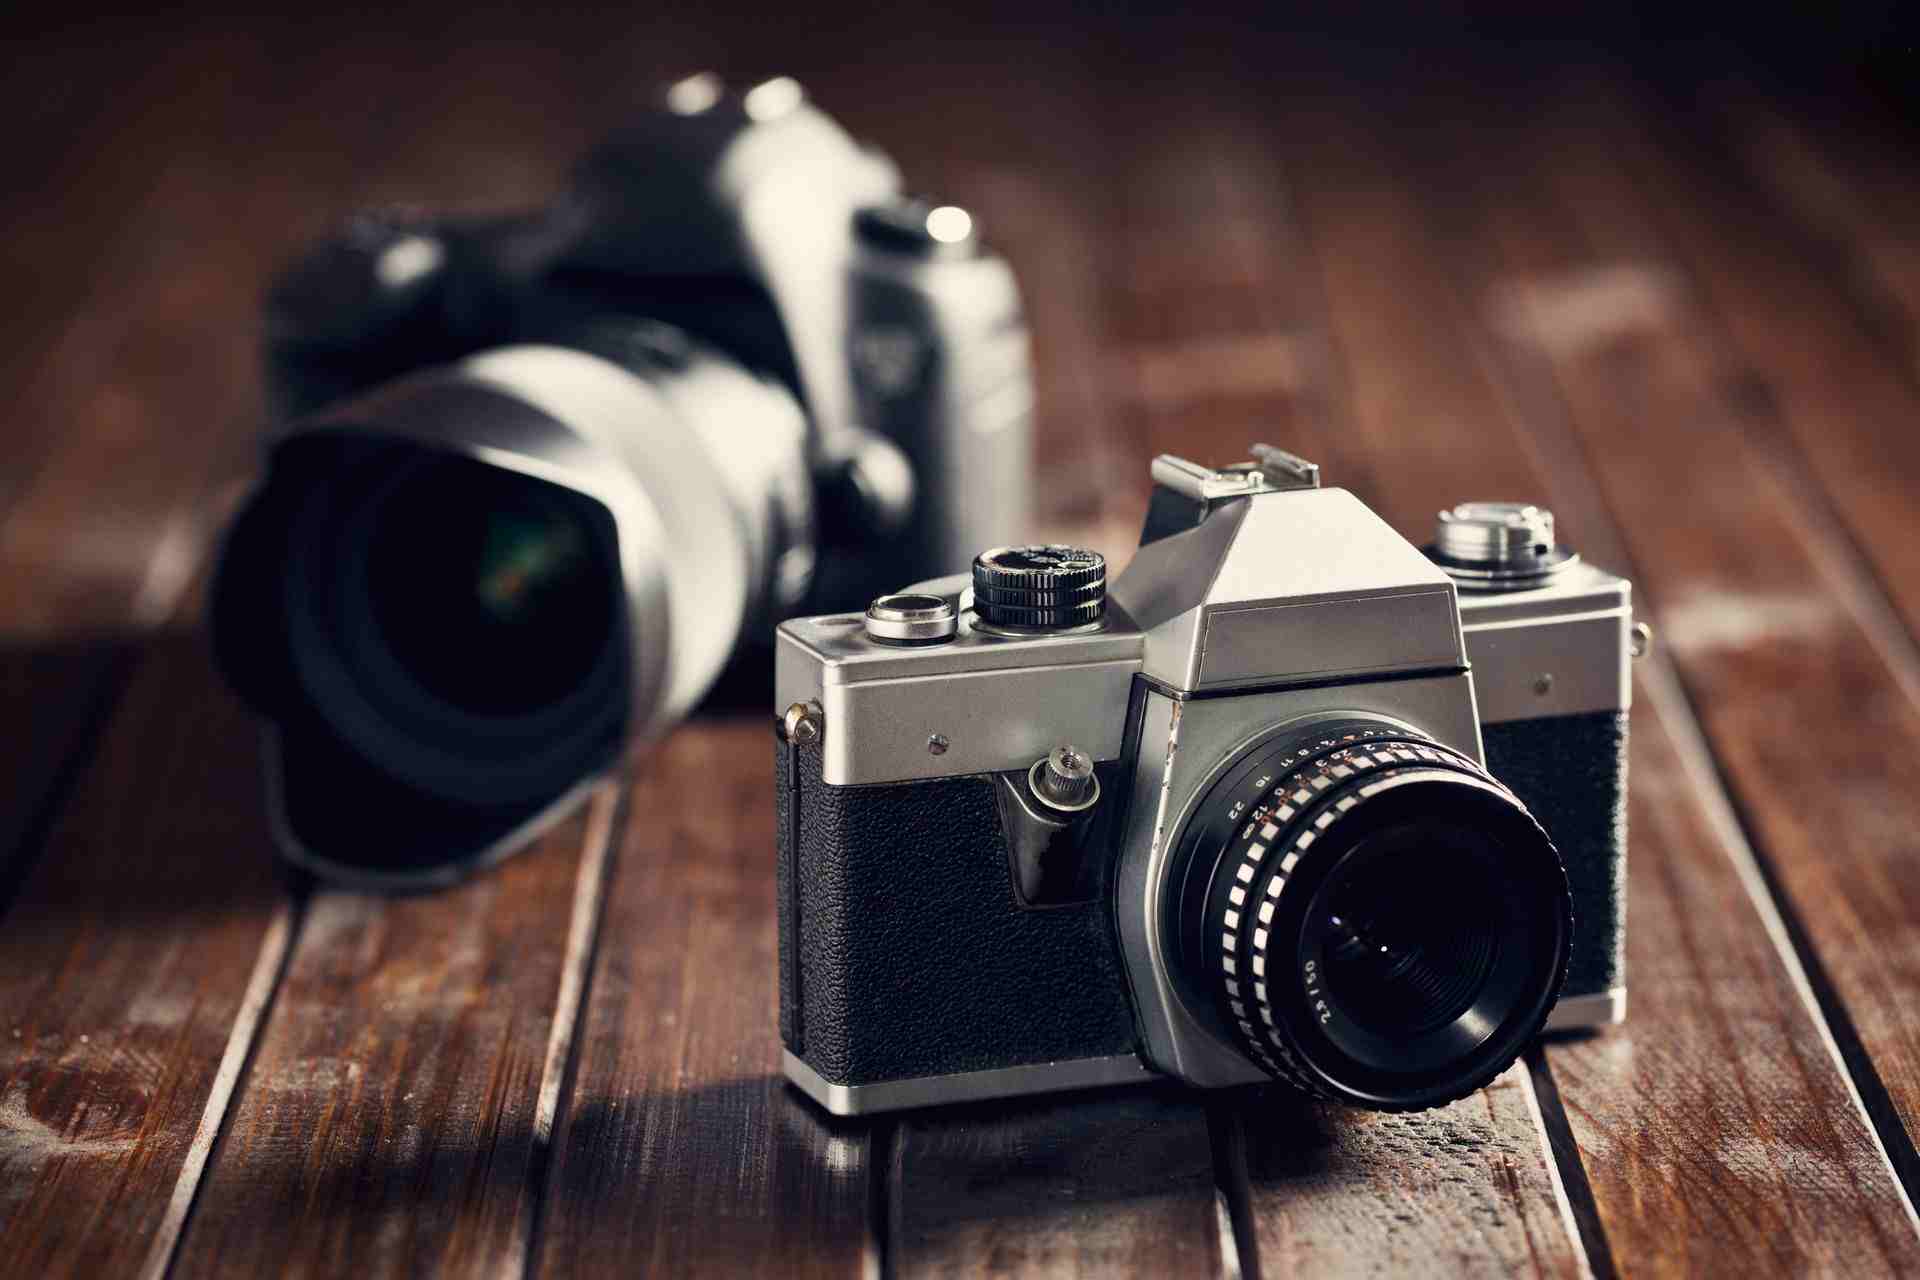 Best DSLR Cameras Under 40000 Rs In India to Buy Online